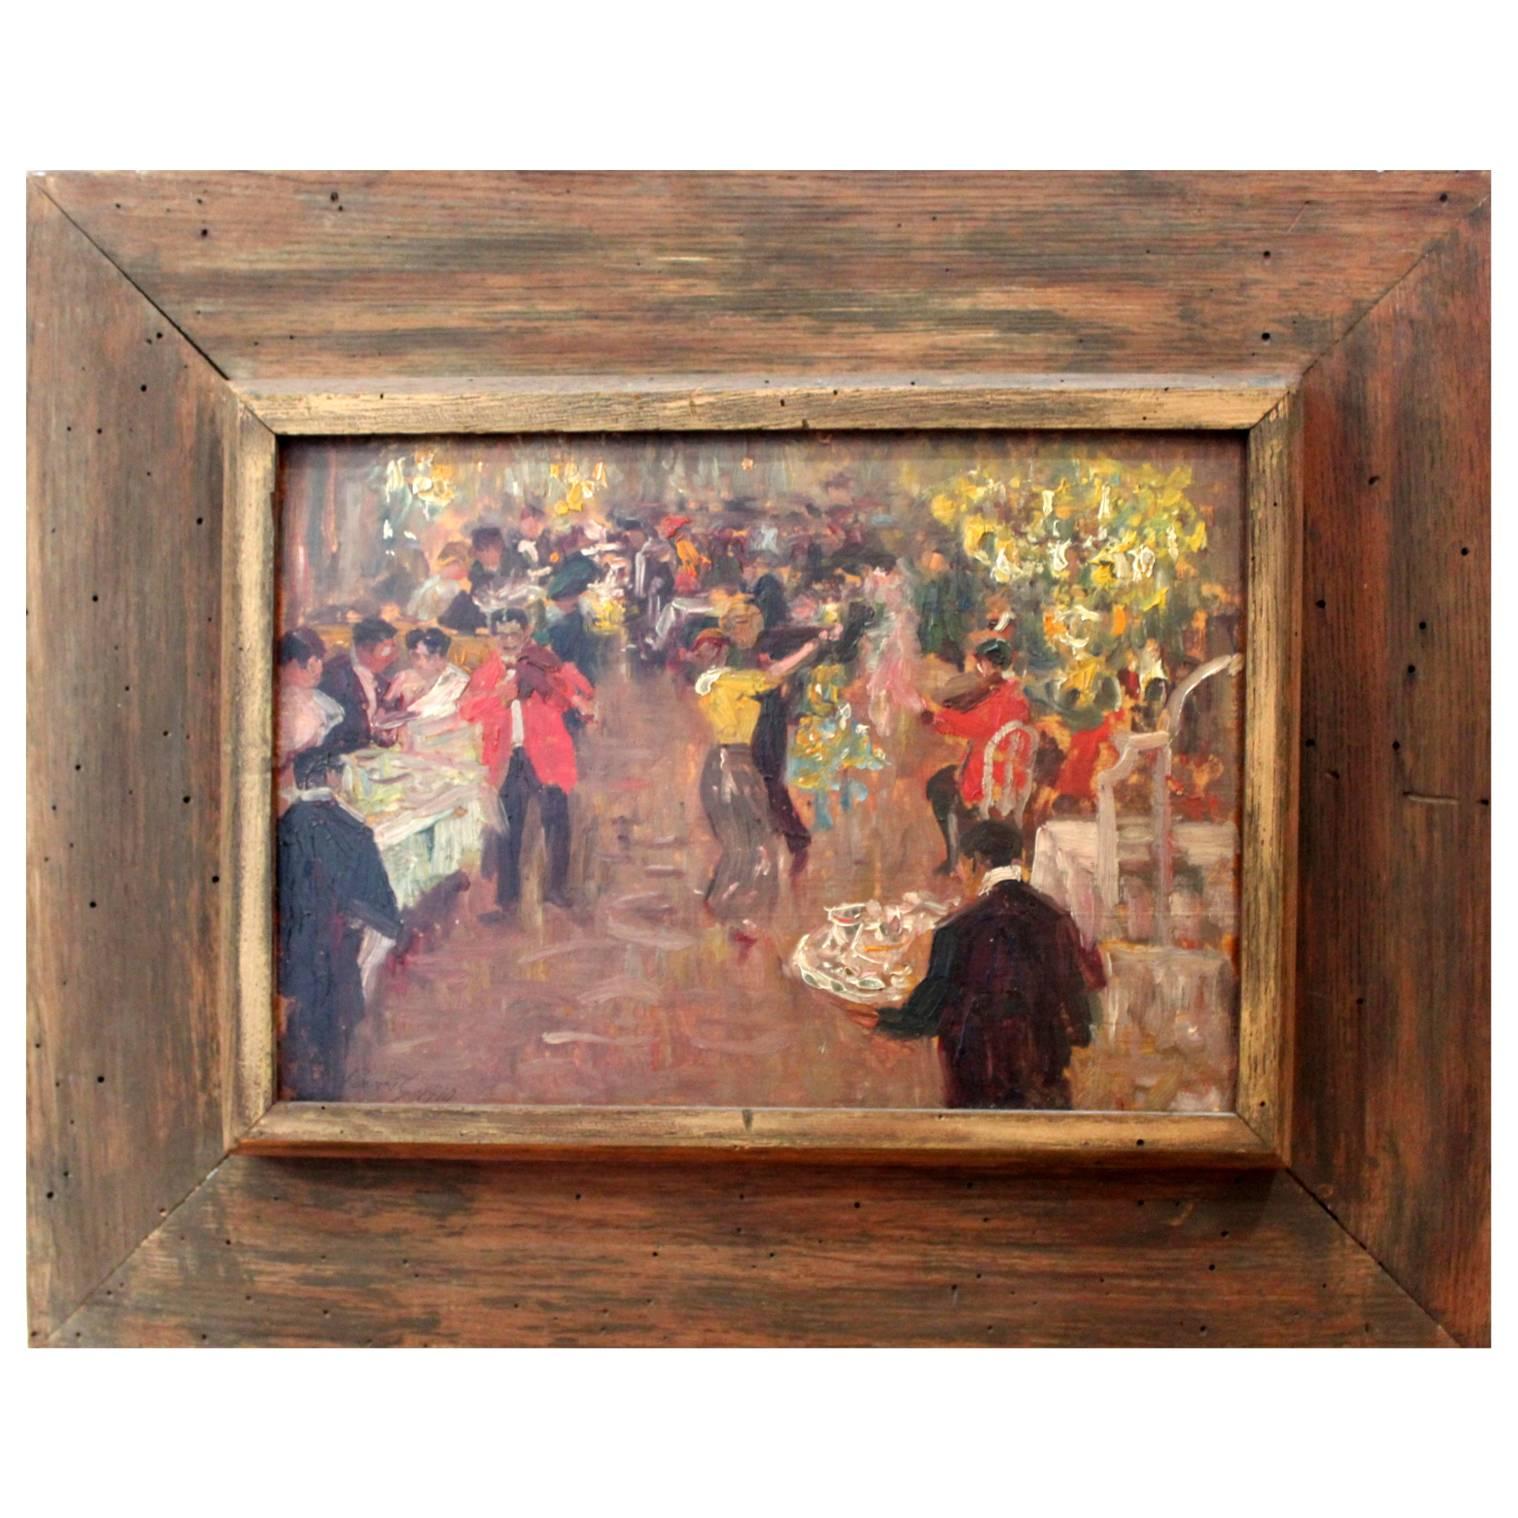 Diminutive Oil on Board Signed by Artist Eli Pavil and Dated 1910